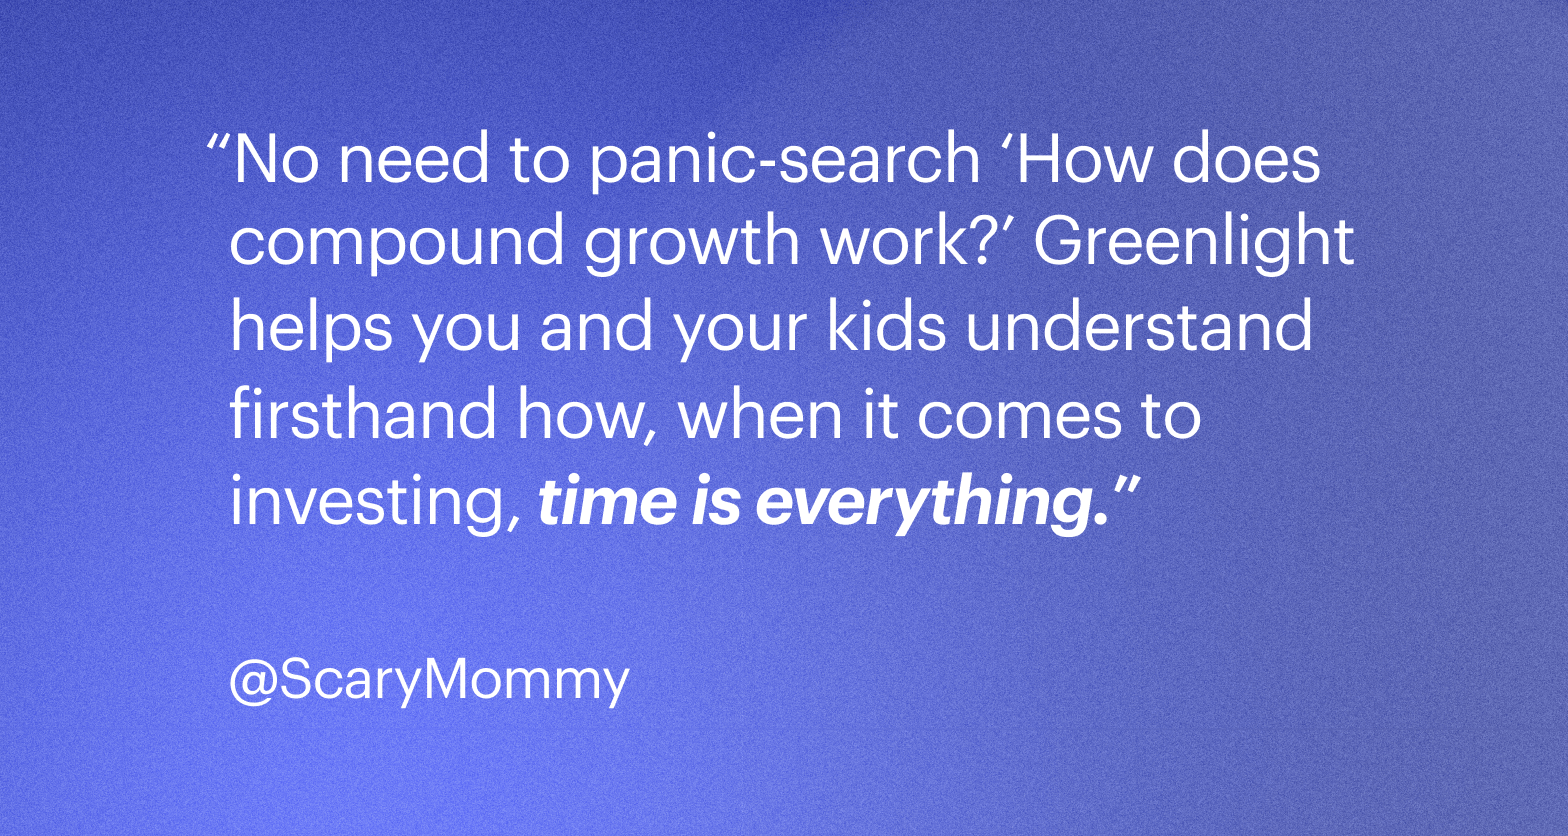 Quote: Greenlight helps you and your kids understand firsthand how, when it comes to investing, time is everything.